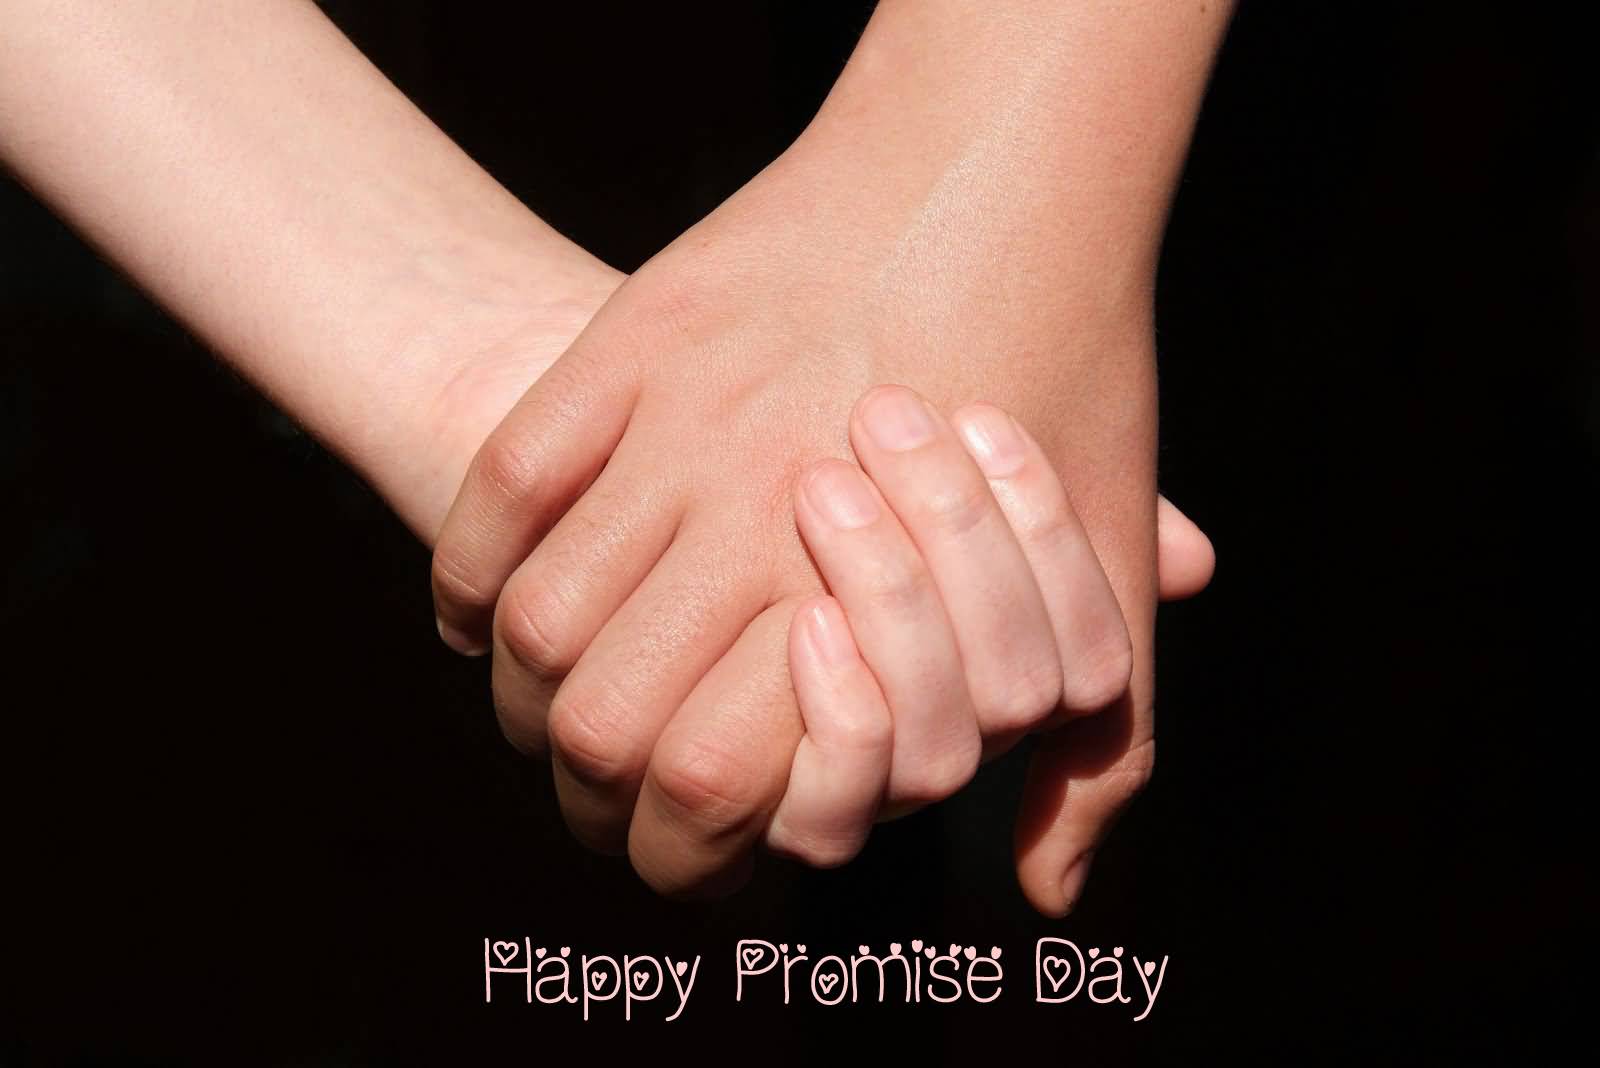 Happy Promise Day 2017 Couple Hands